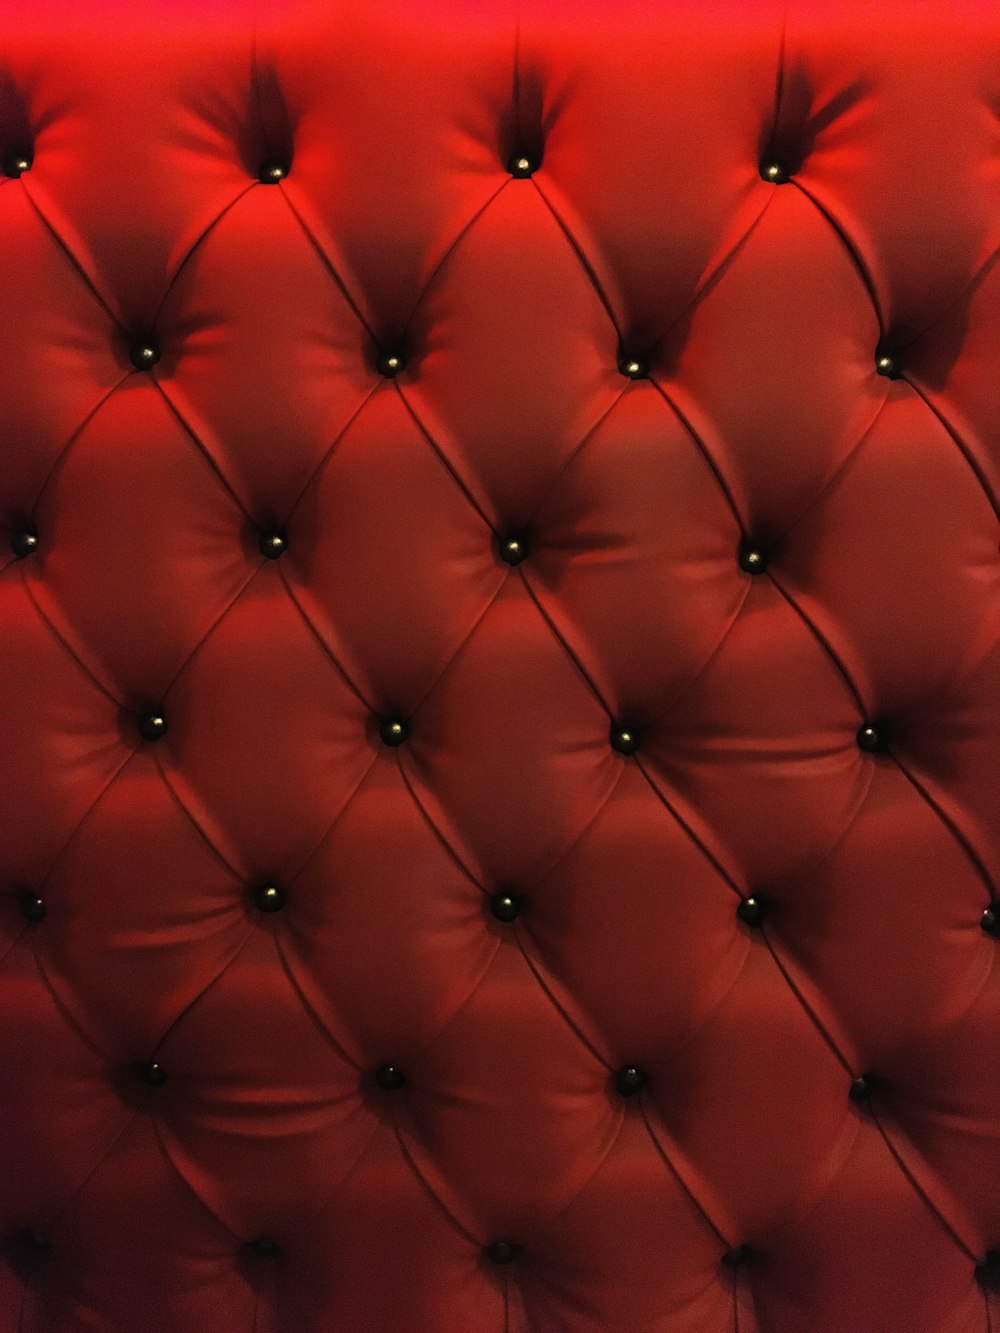 a close up of a red leather chair